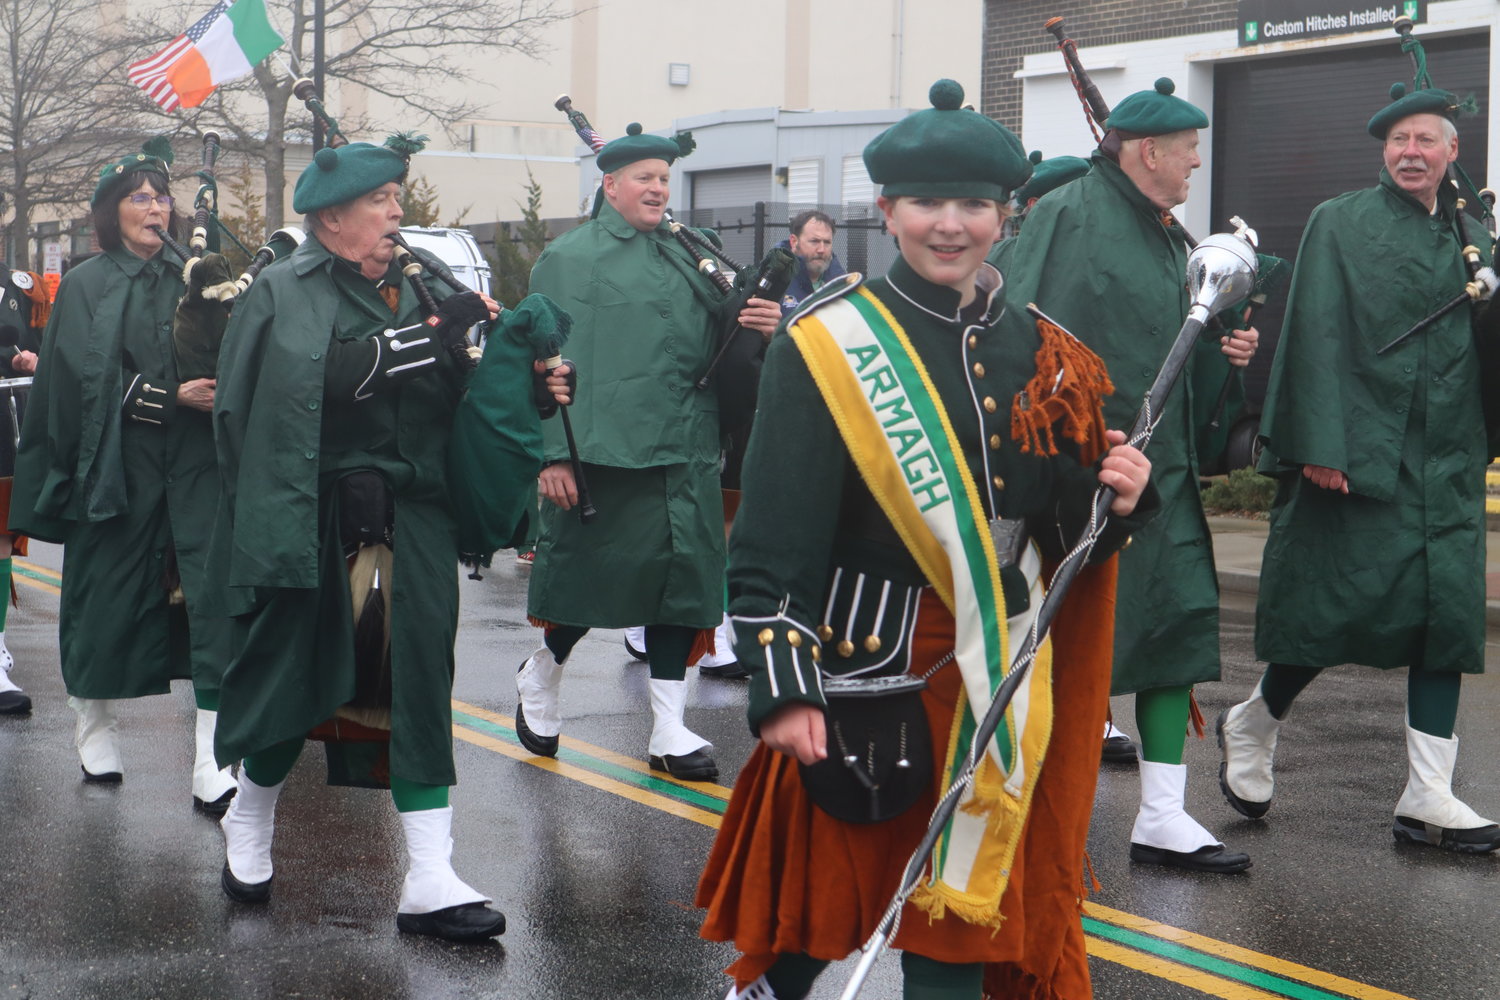 Traditional bagpipers, below, from Armagh County in Northern Ireland, the religious capital of the country, where St. Patrick is believed to have founded a Celtic monastery, made the journey to Long Island for the parade.